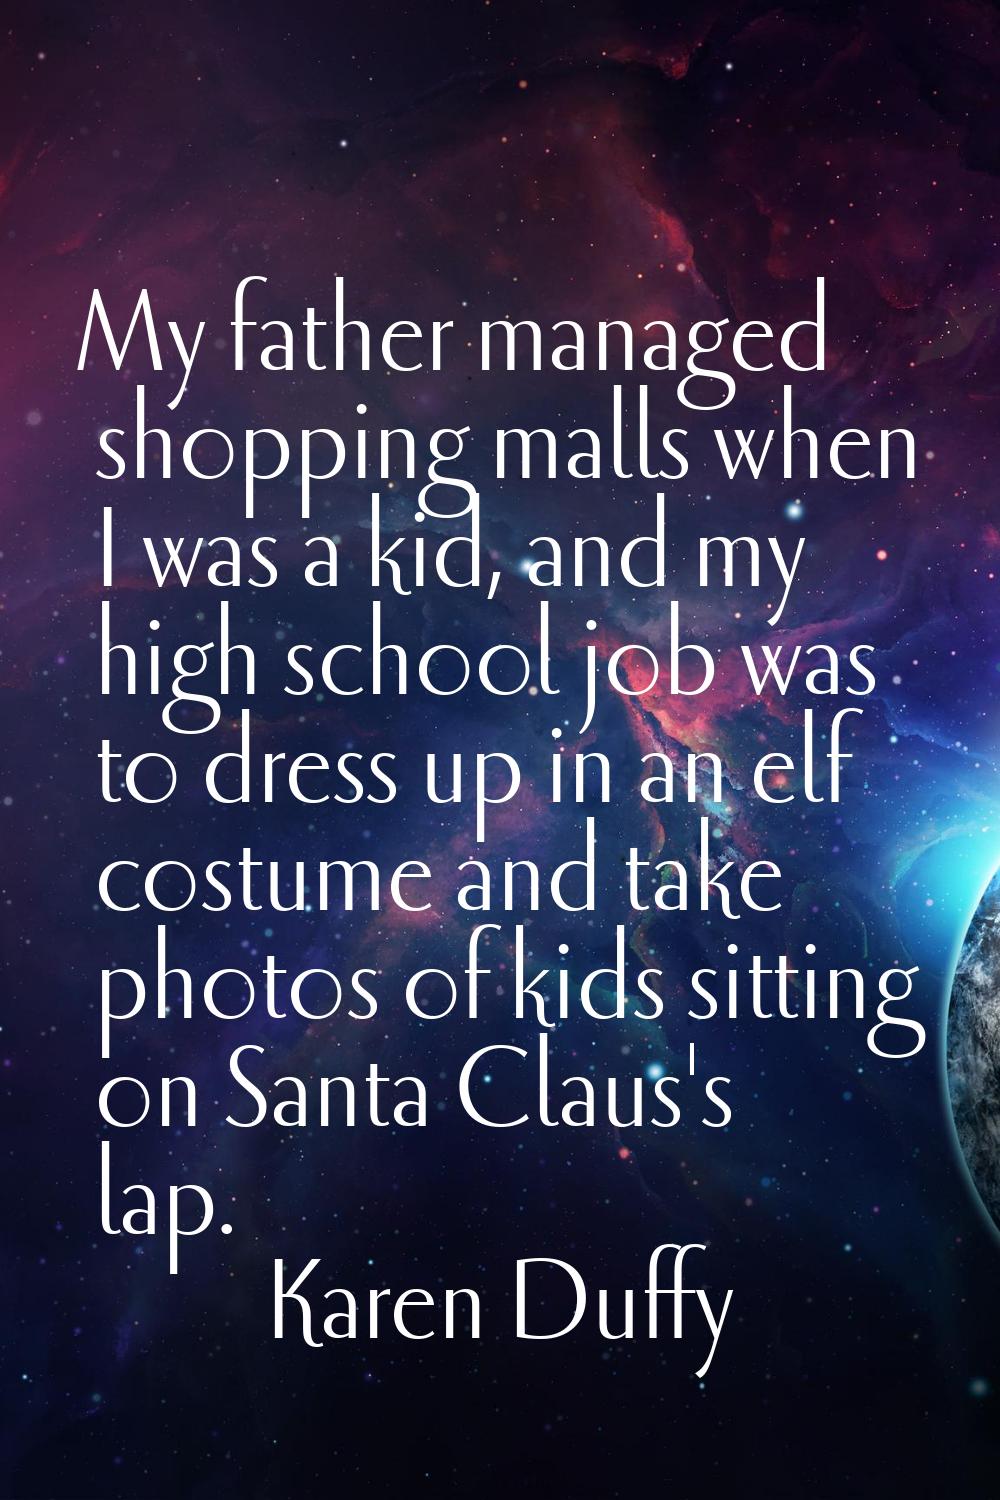 My father managed shopping malls when I was a kid, and my high school job was to dress up in an elf